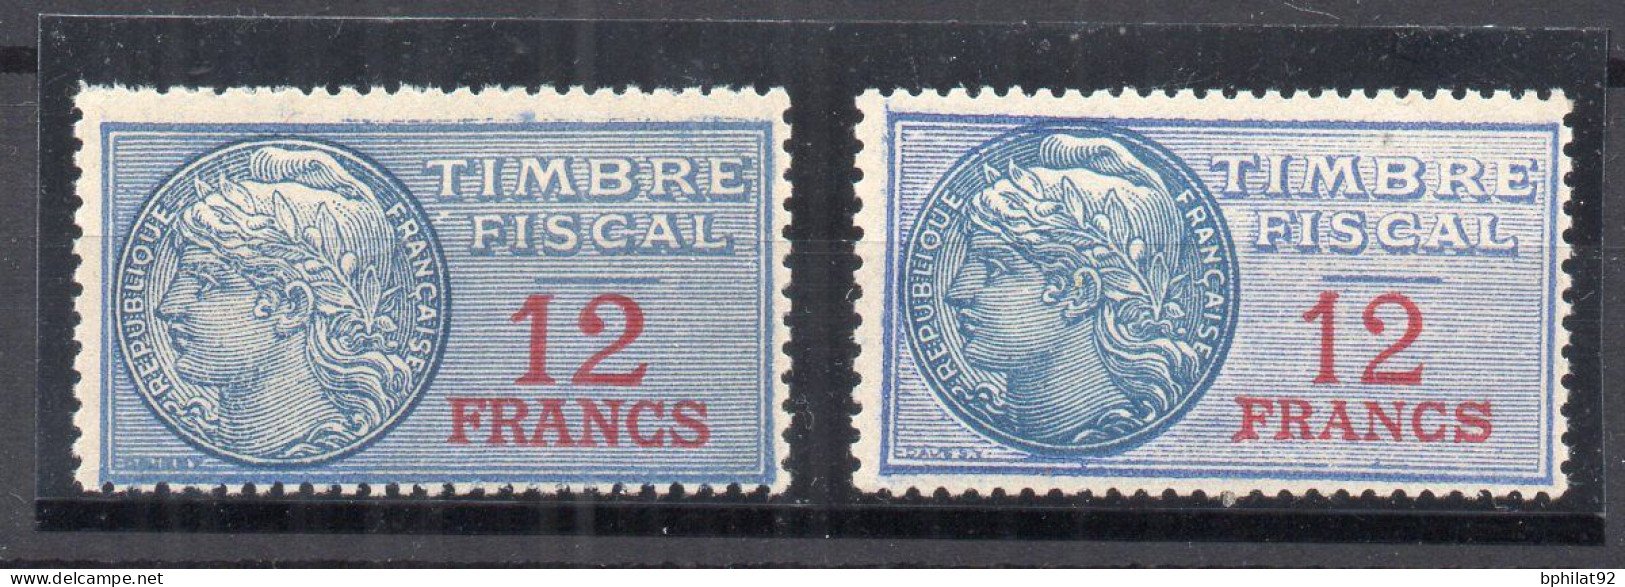 !!! TIMBRES FISCAUX N°38 ET 38b NEUFS ** - Timbres